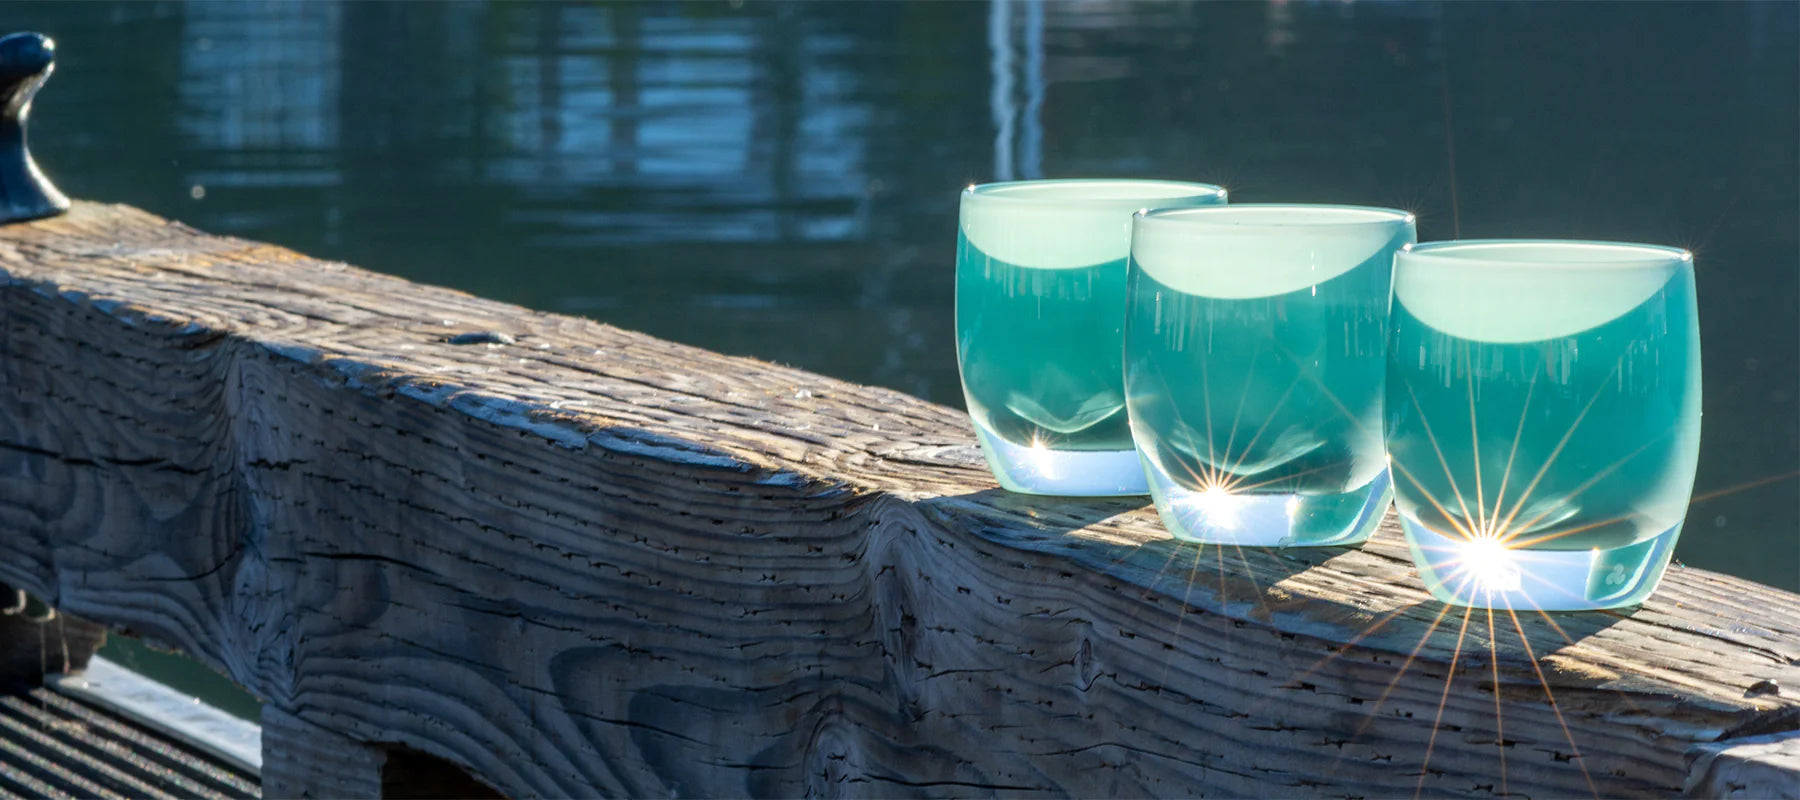 strength green, hand-blown glass votive candle holders